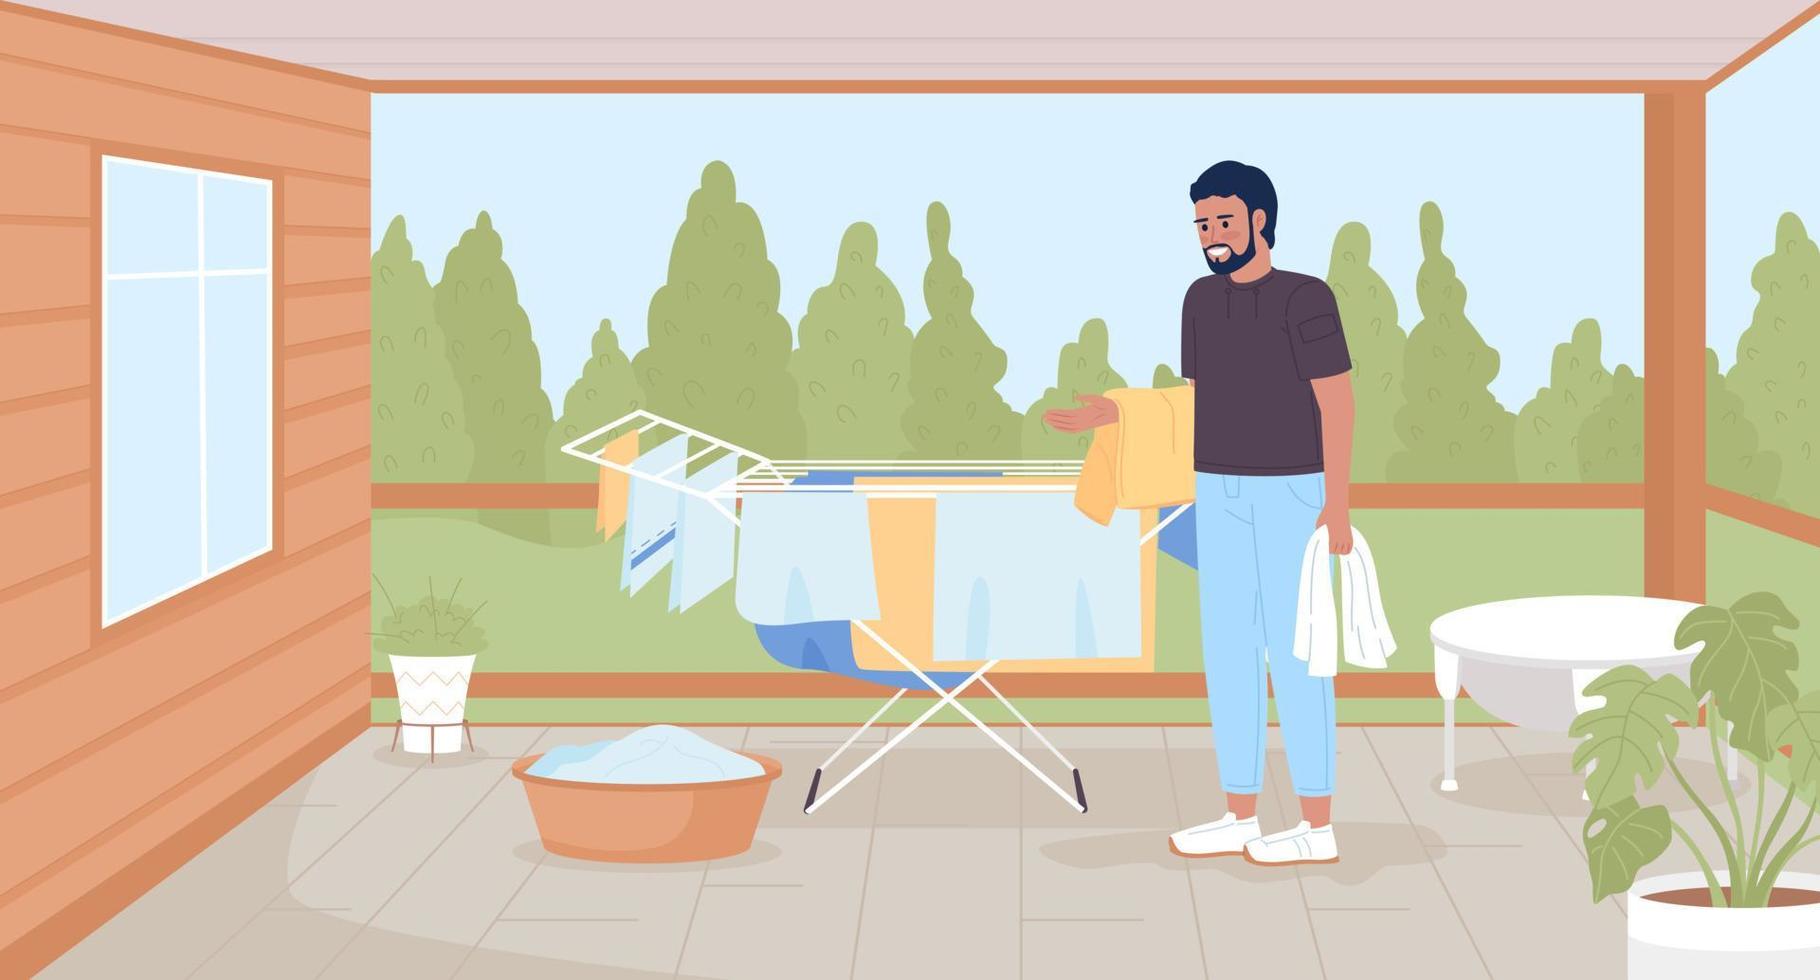 Drying clothes without dryer for energy saving flat color vector illustration. Man using rack for clean towels. Hero image. Fully editable 2D simple cartoon characters with back porch on background